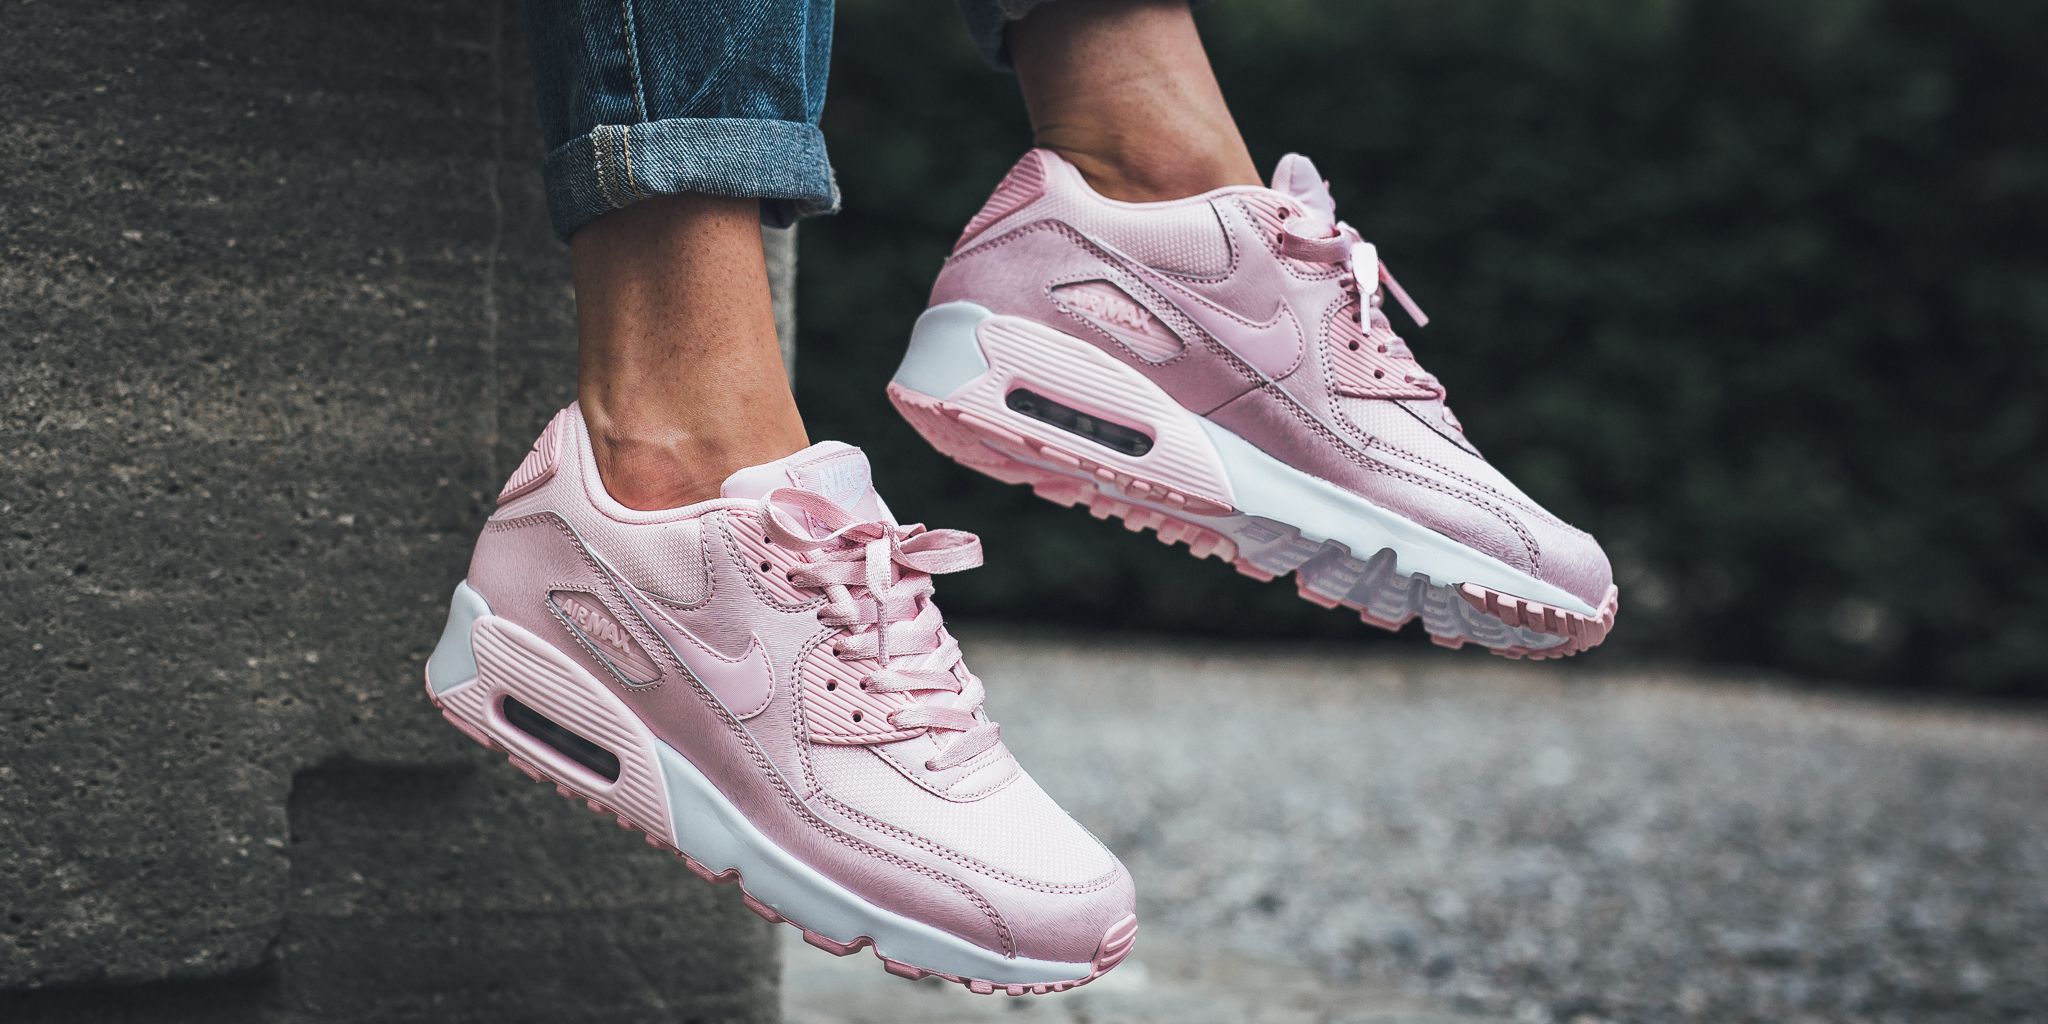 Titolo Twitter: "NEW IN! Nike Air Max 90 Se Mesh (Gs) - Prism Pink/Prism Pink-White HERE: https://t.co/VwZ0Q8H22M" / Twitter